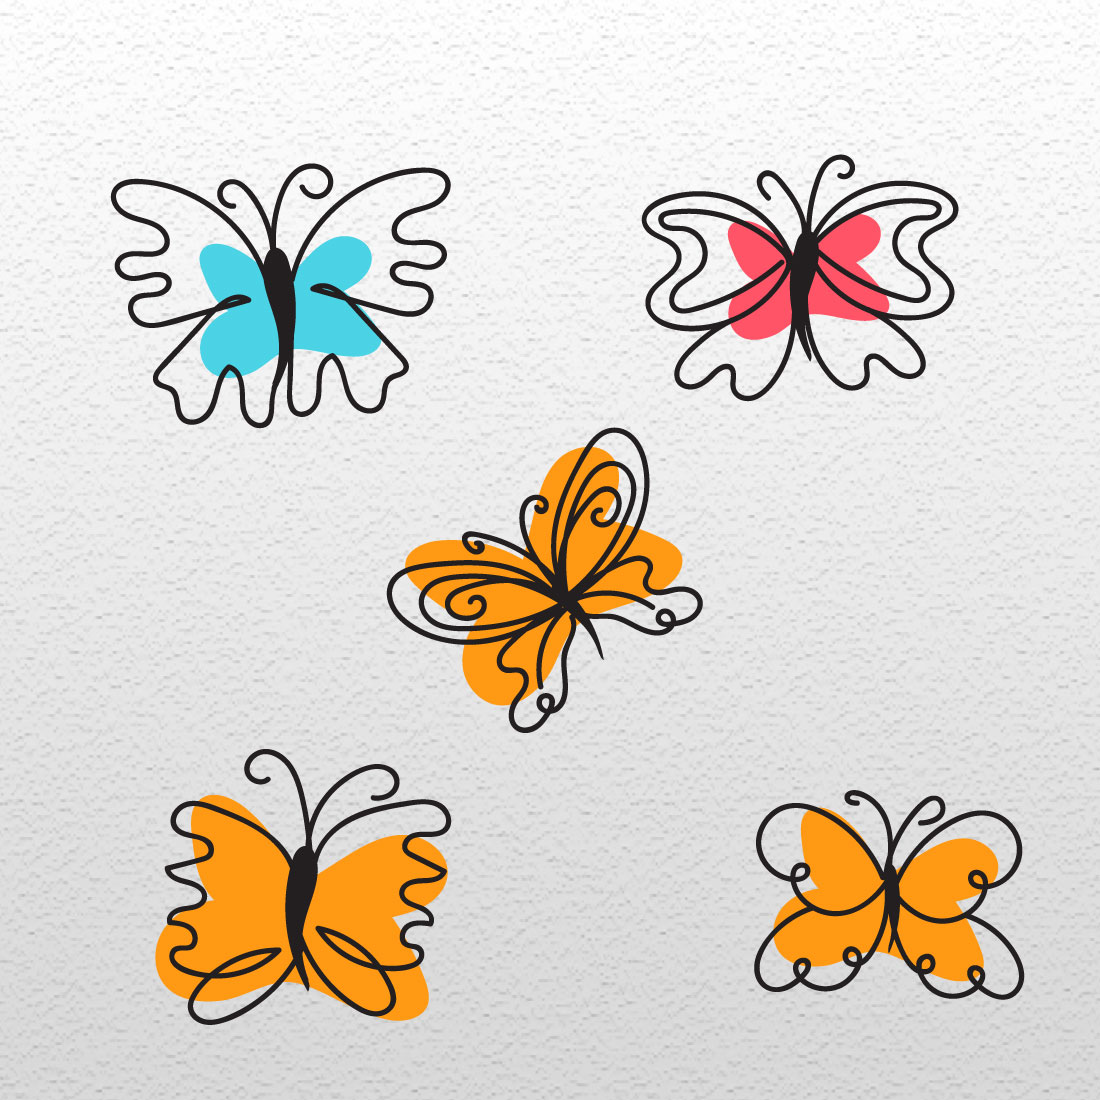 Four different colored butterflies on a white background.